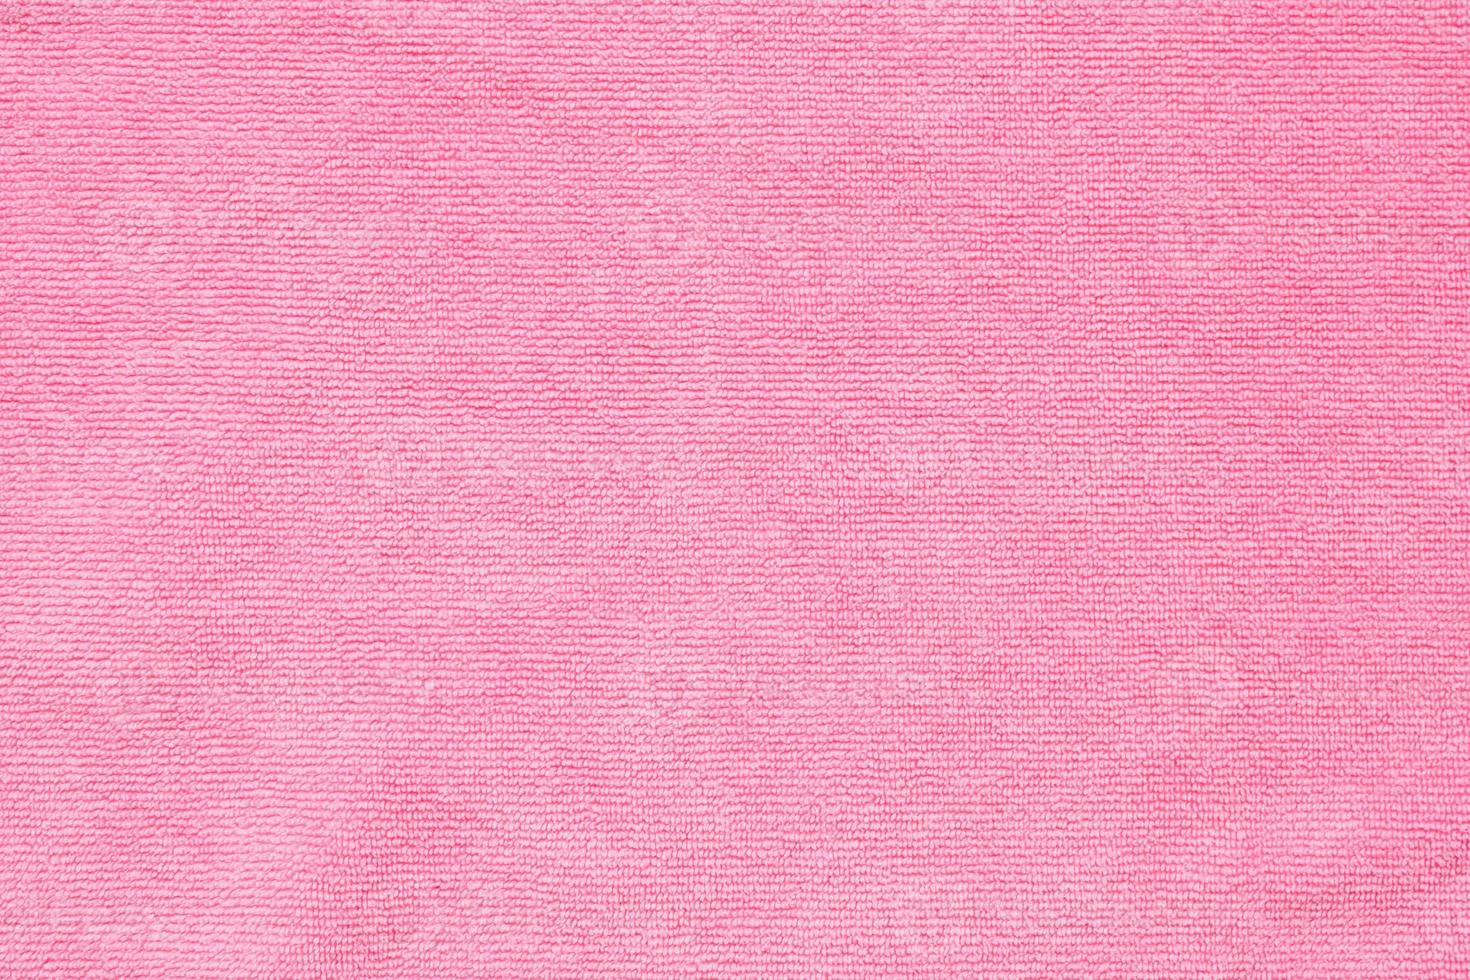 Pink towel fabric texture surface close up background photo